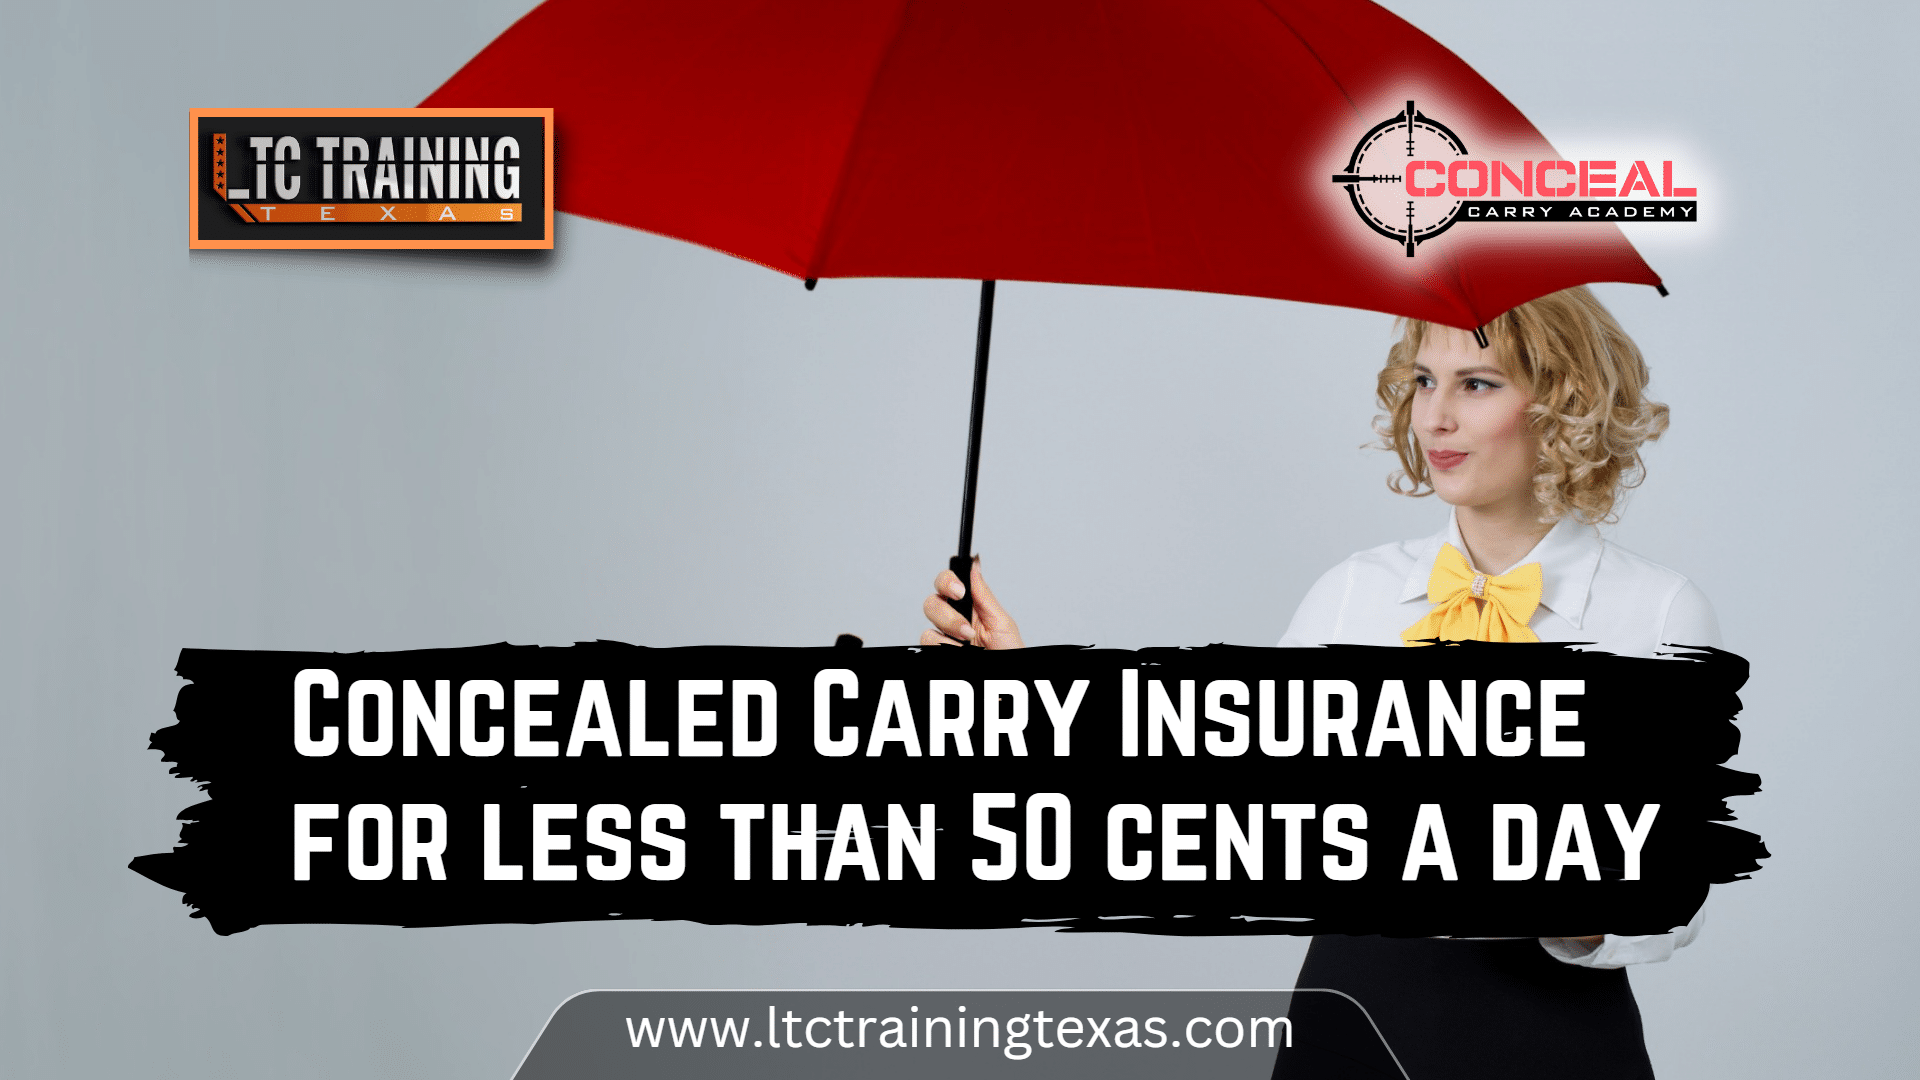 Concealed Carry Insurance for less than 50 Cents A Day